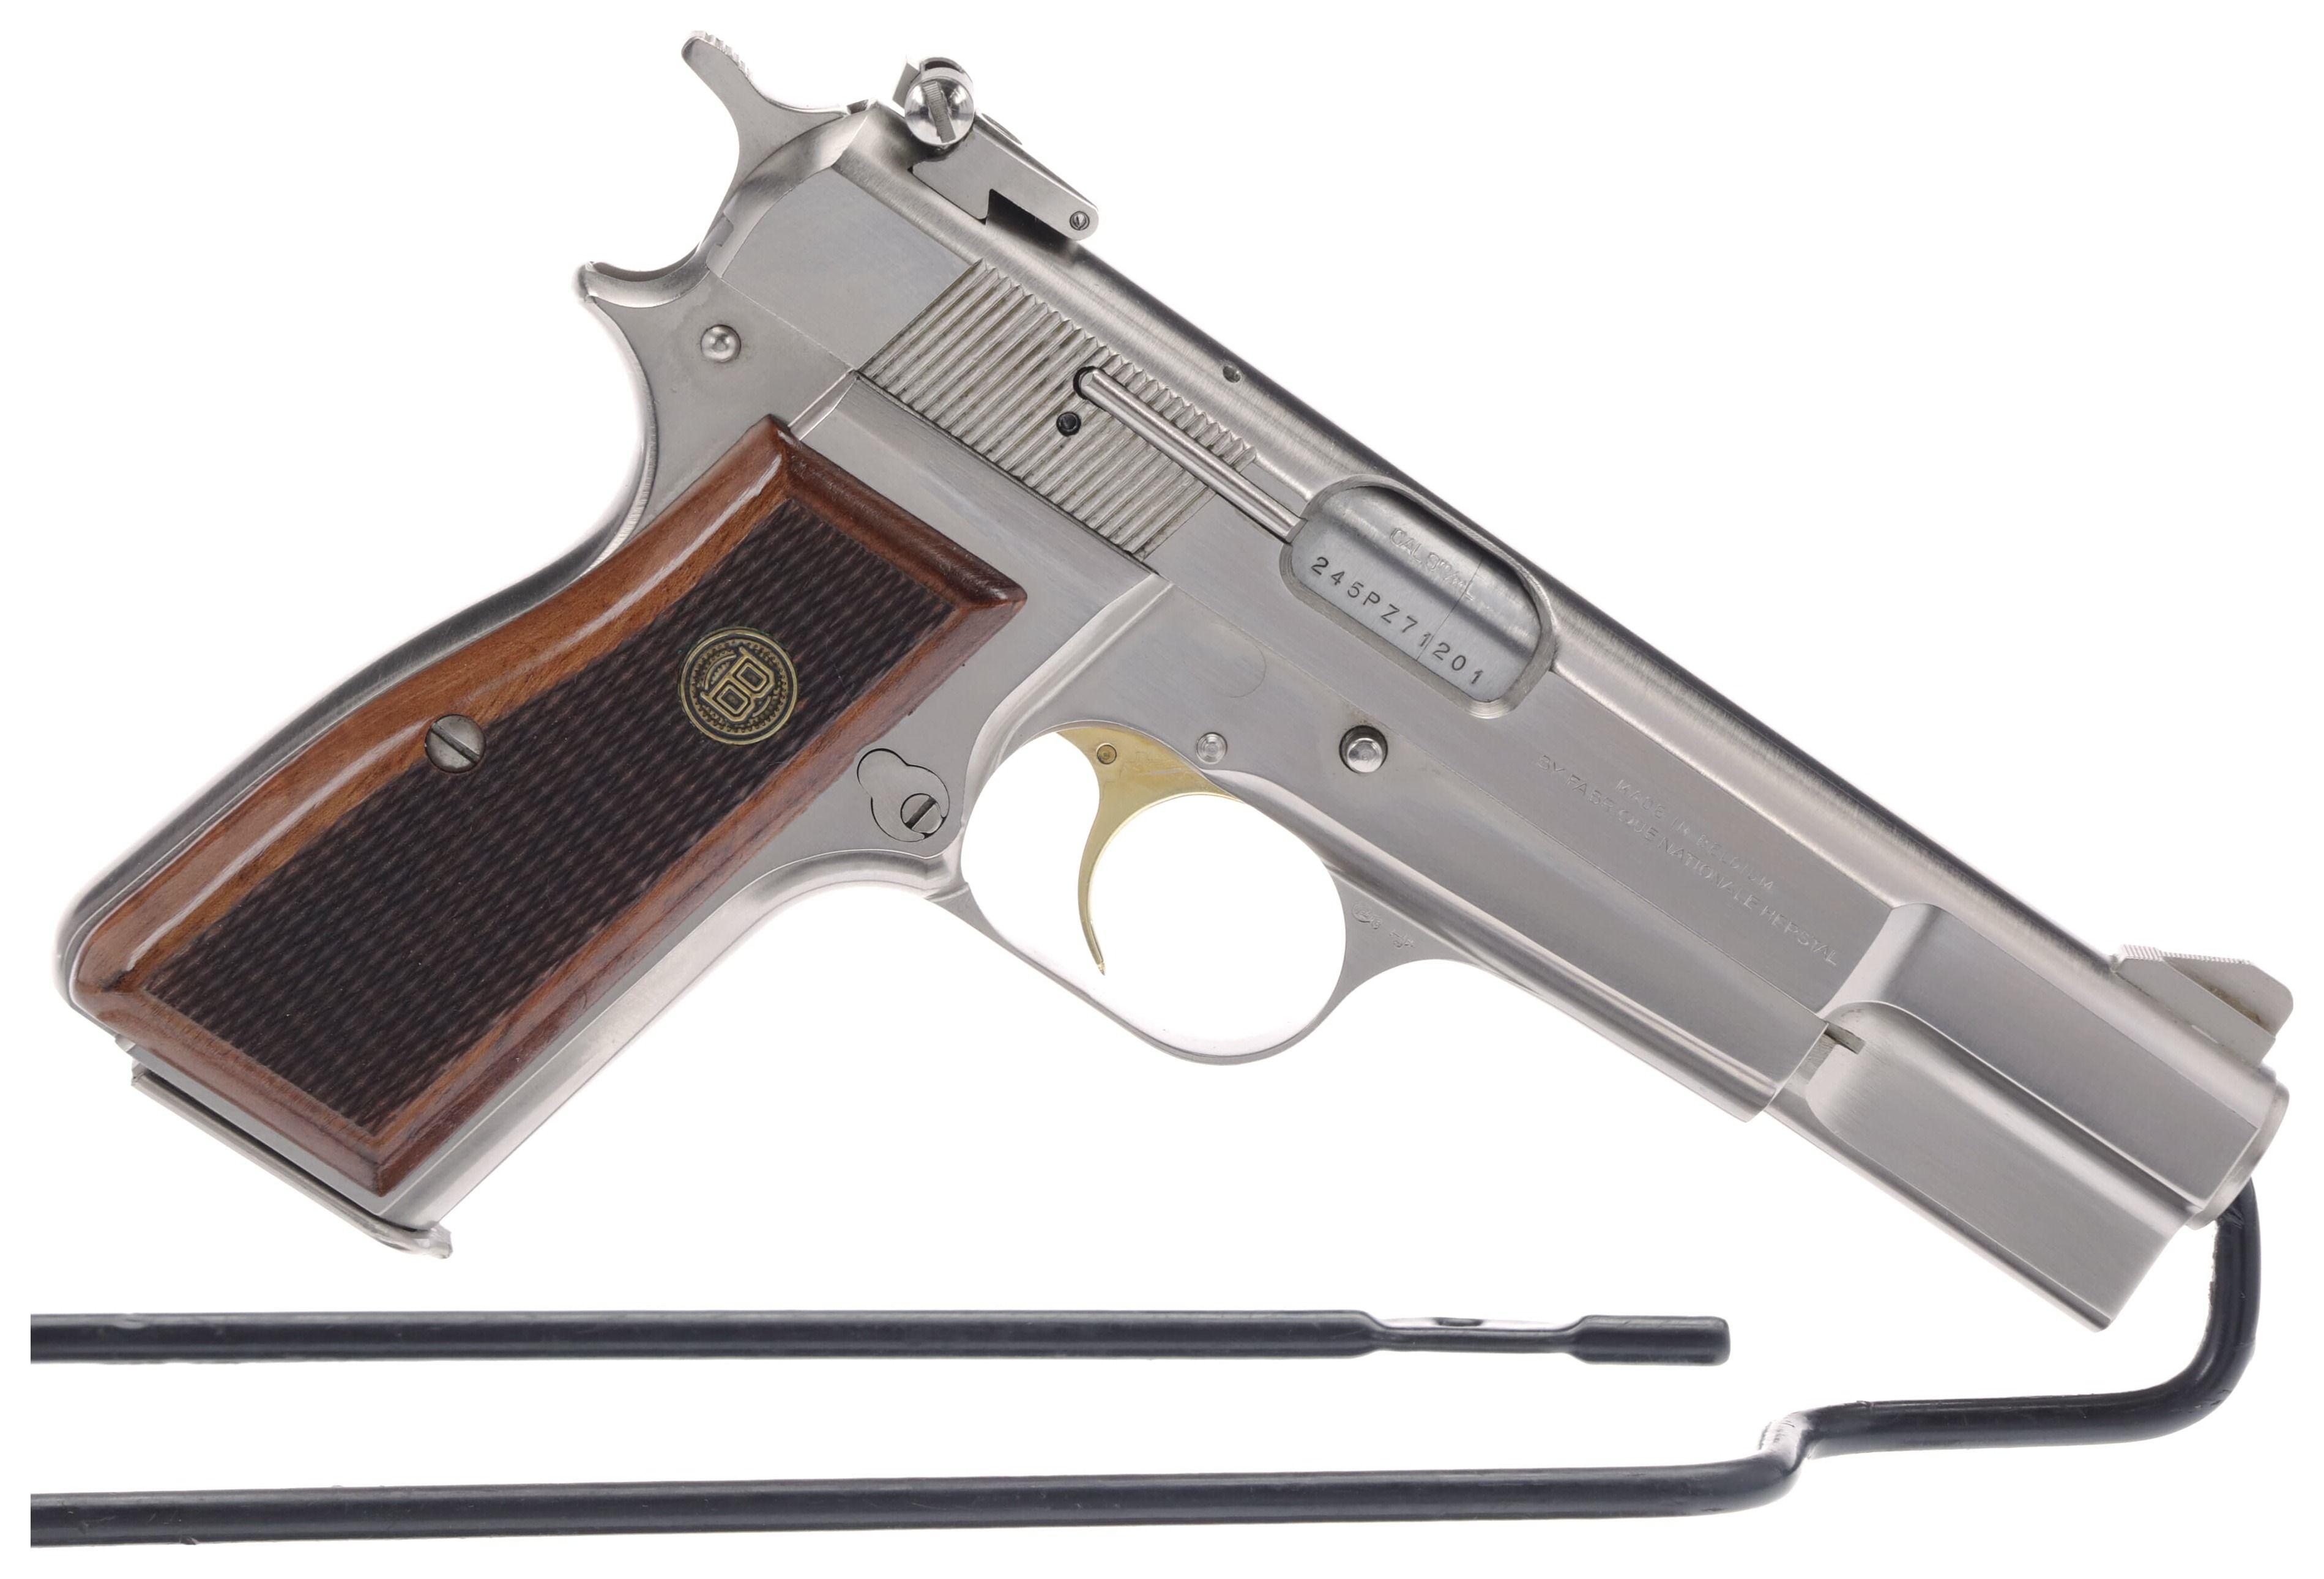 Belgian Browning High-Power Semi-Automatic Pistol with Wood Case